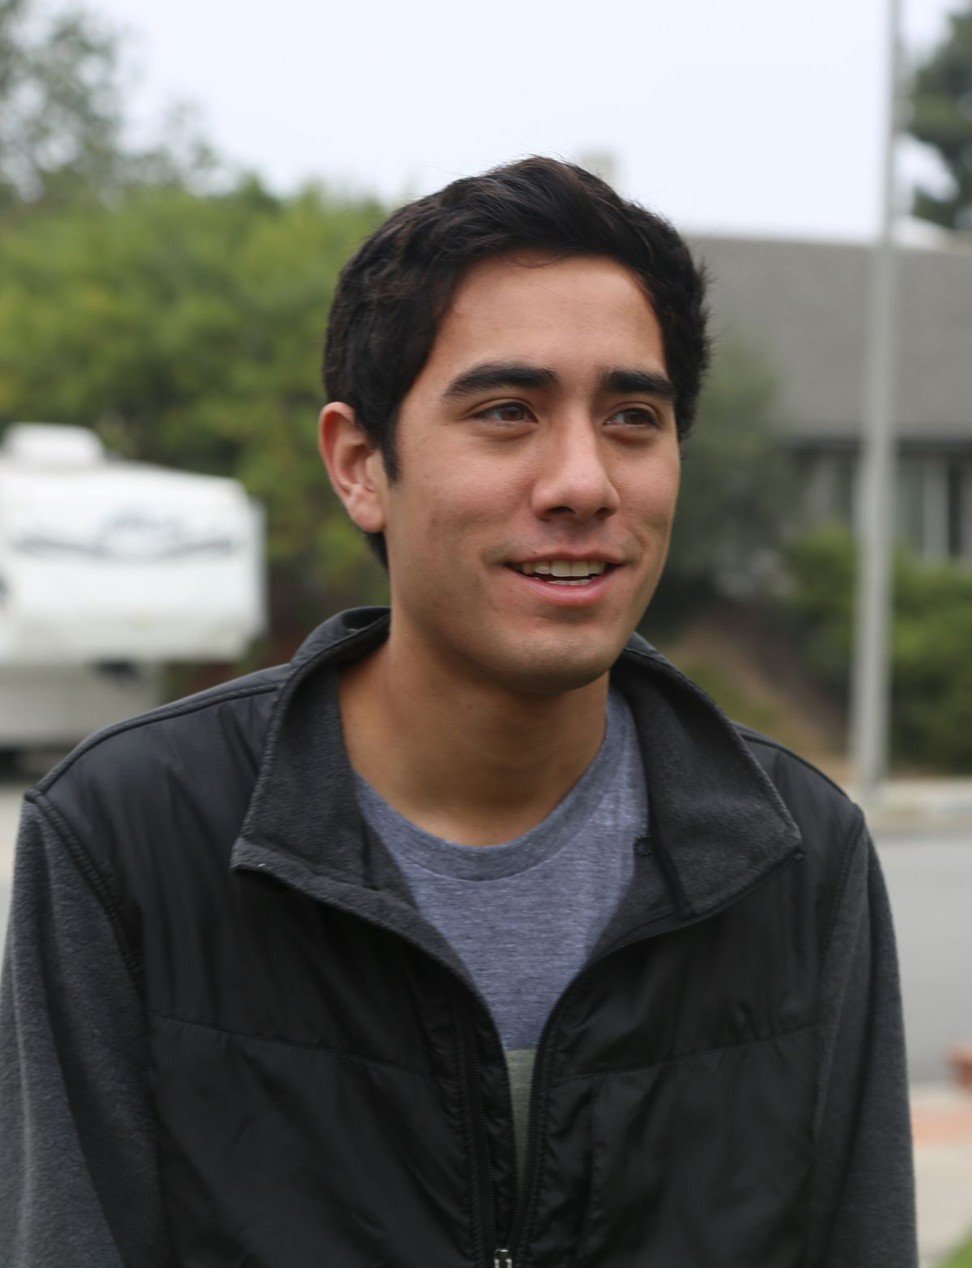 Zach King moved to Musical.ly when Vine shut down.